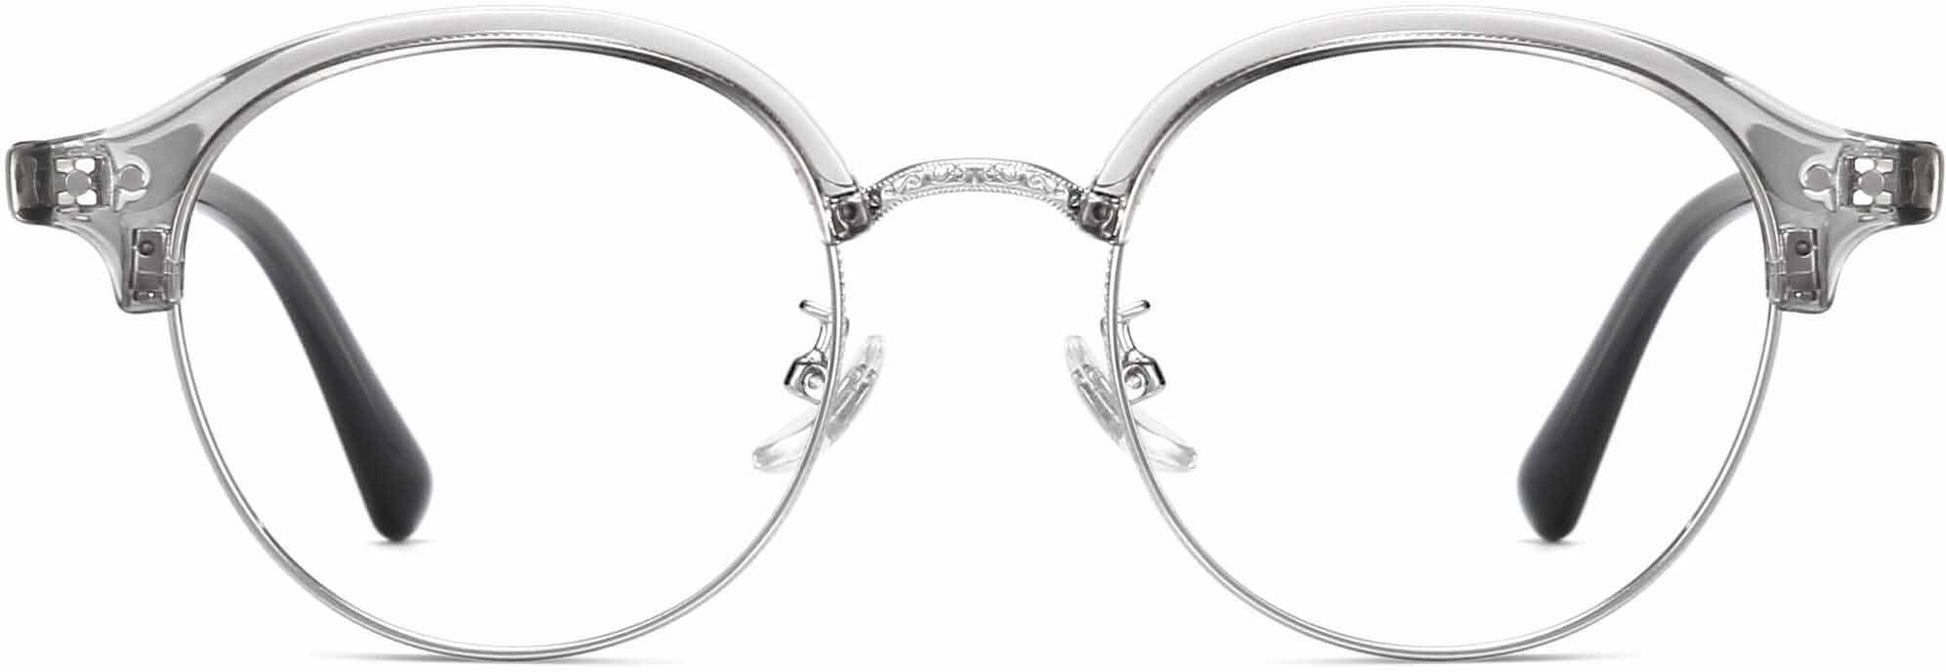 Grant Browline Gray Eyeglasses from ANRRI, front view